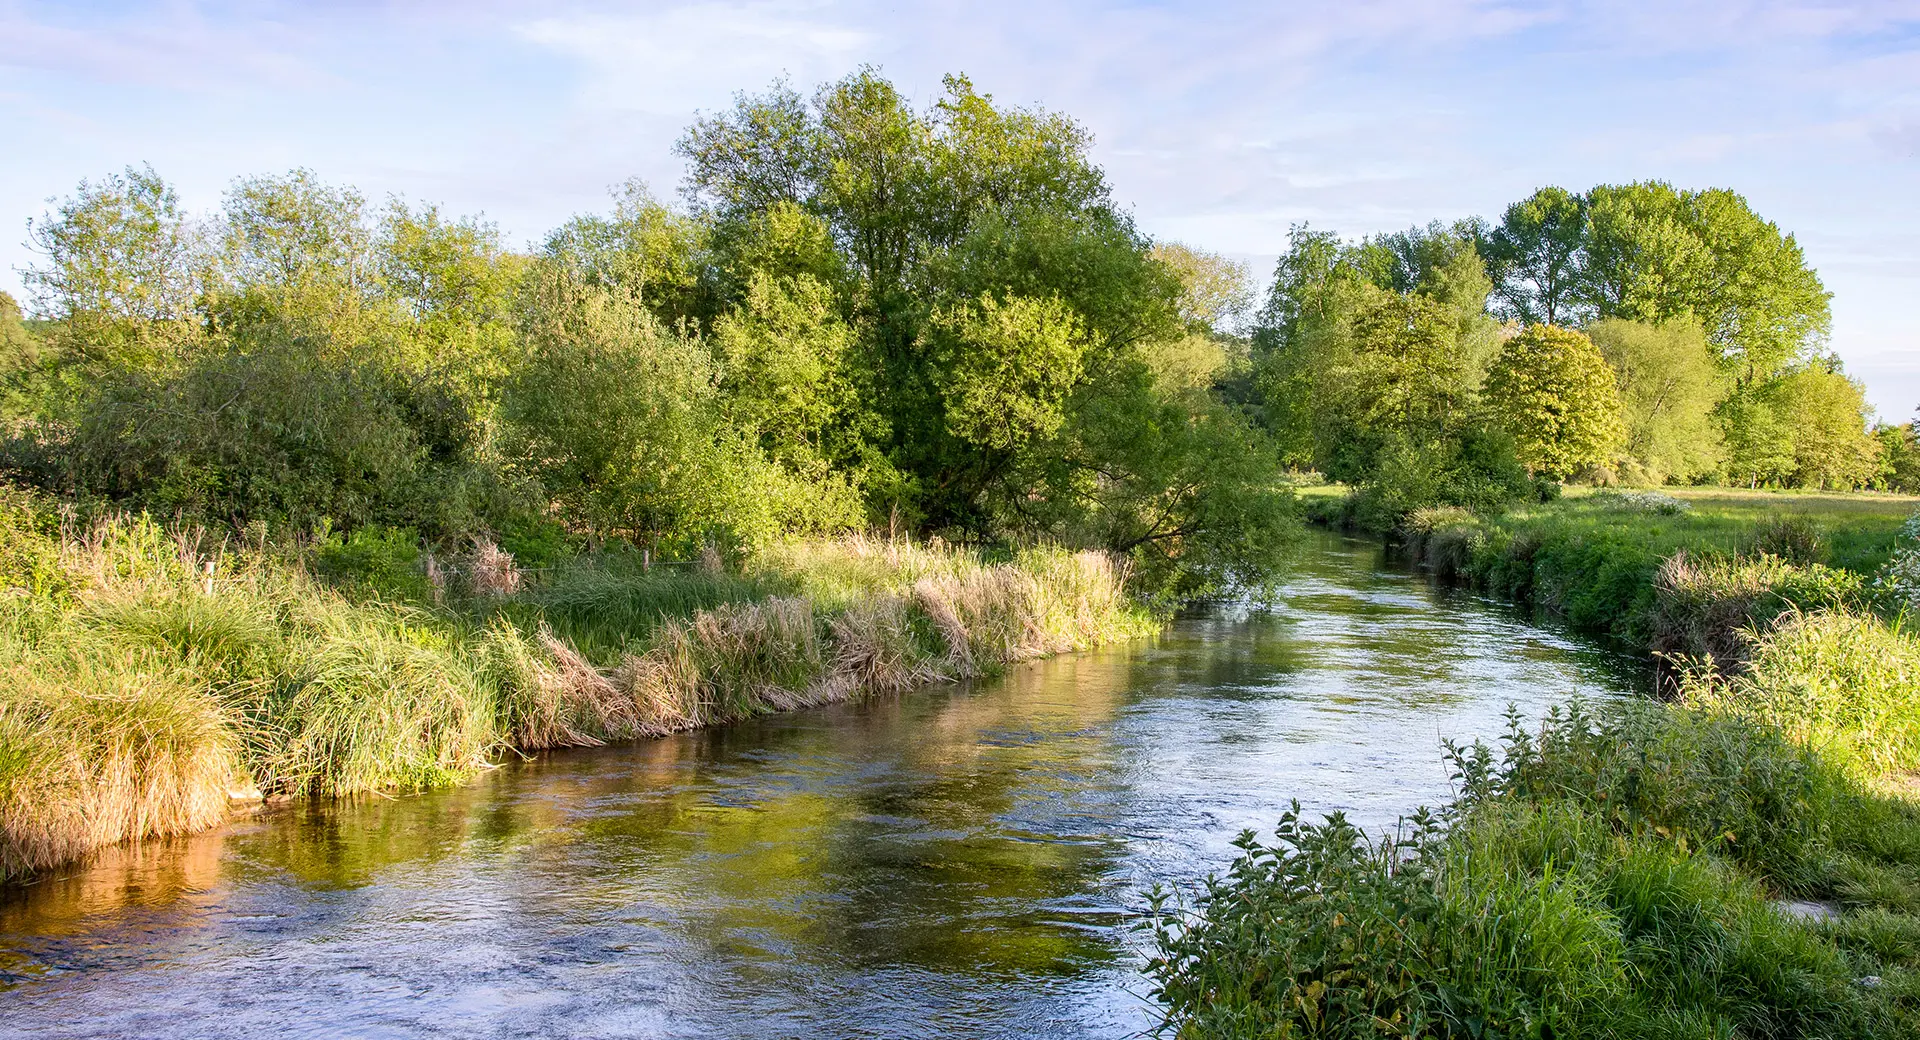 A shot of a fast flowing river cutting through a field with trees